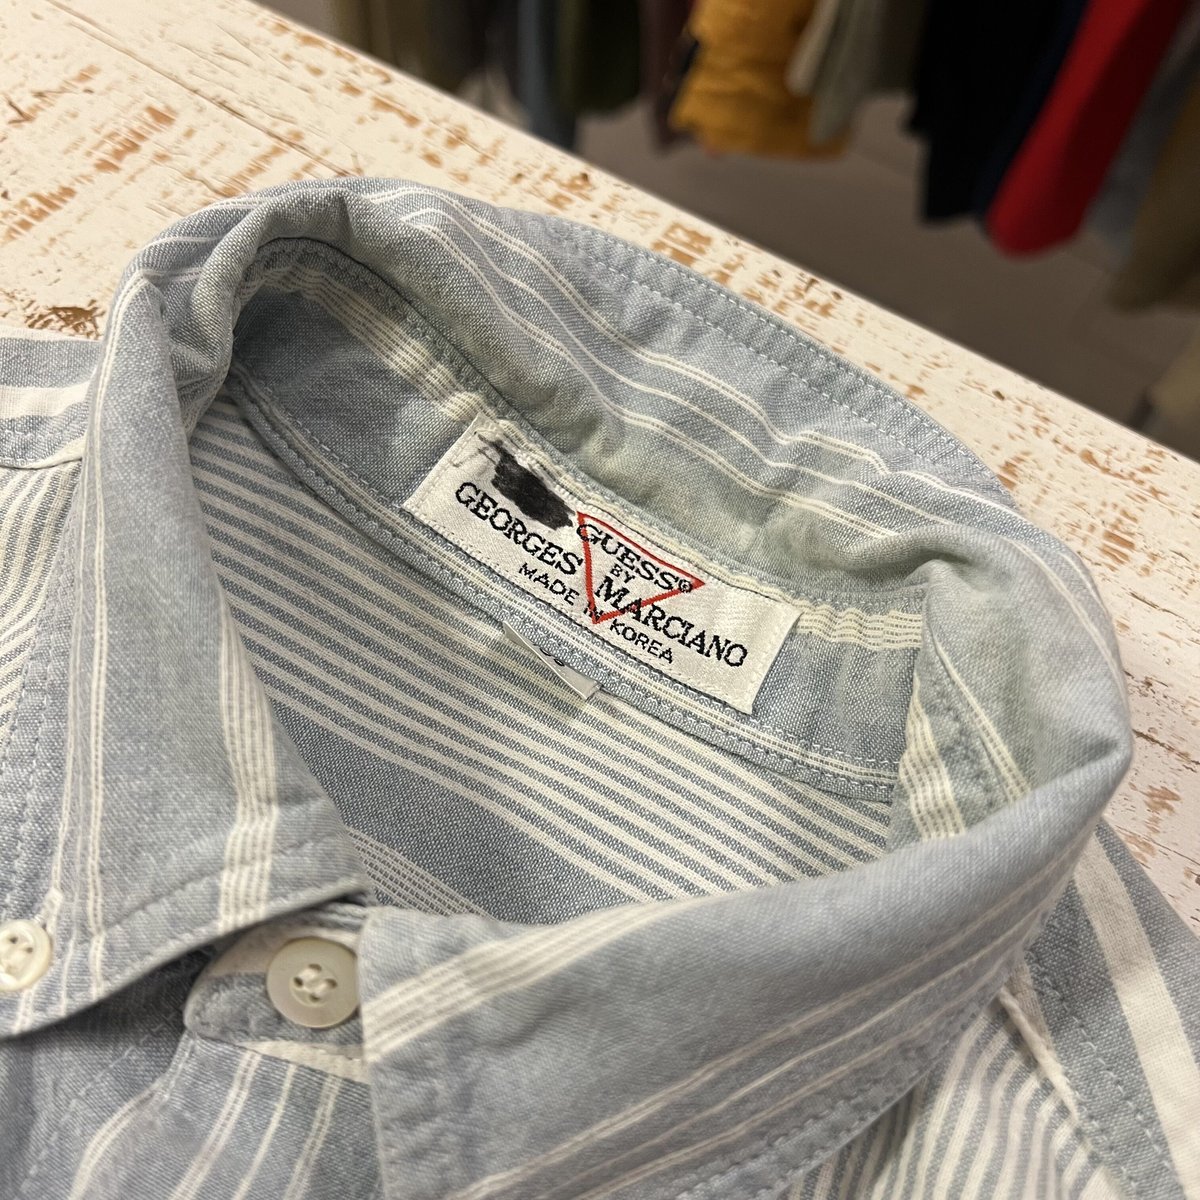 【 “Guess by Georges marciano” shirt 】